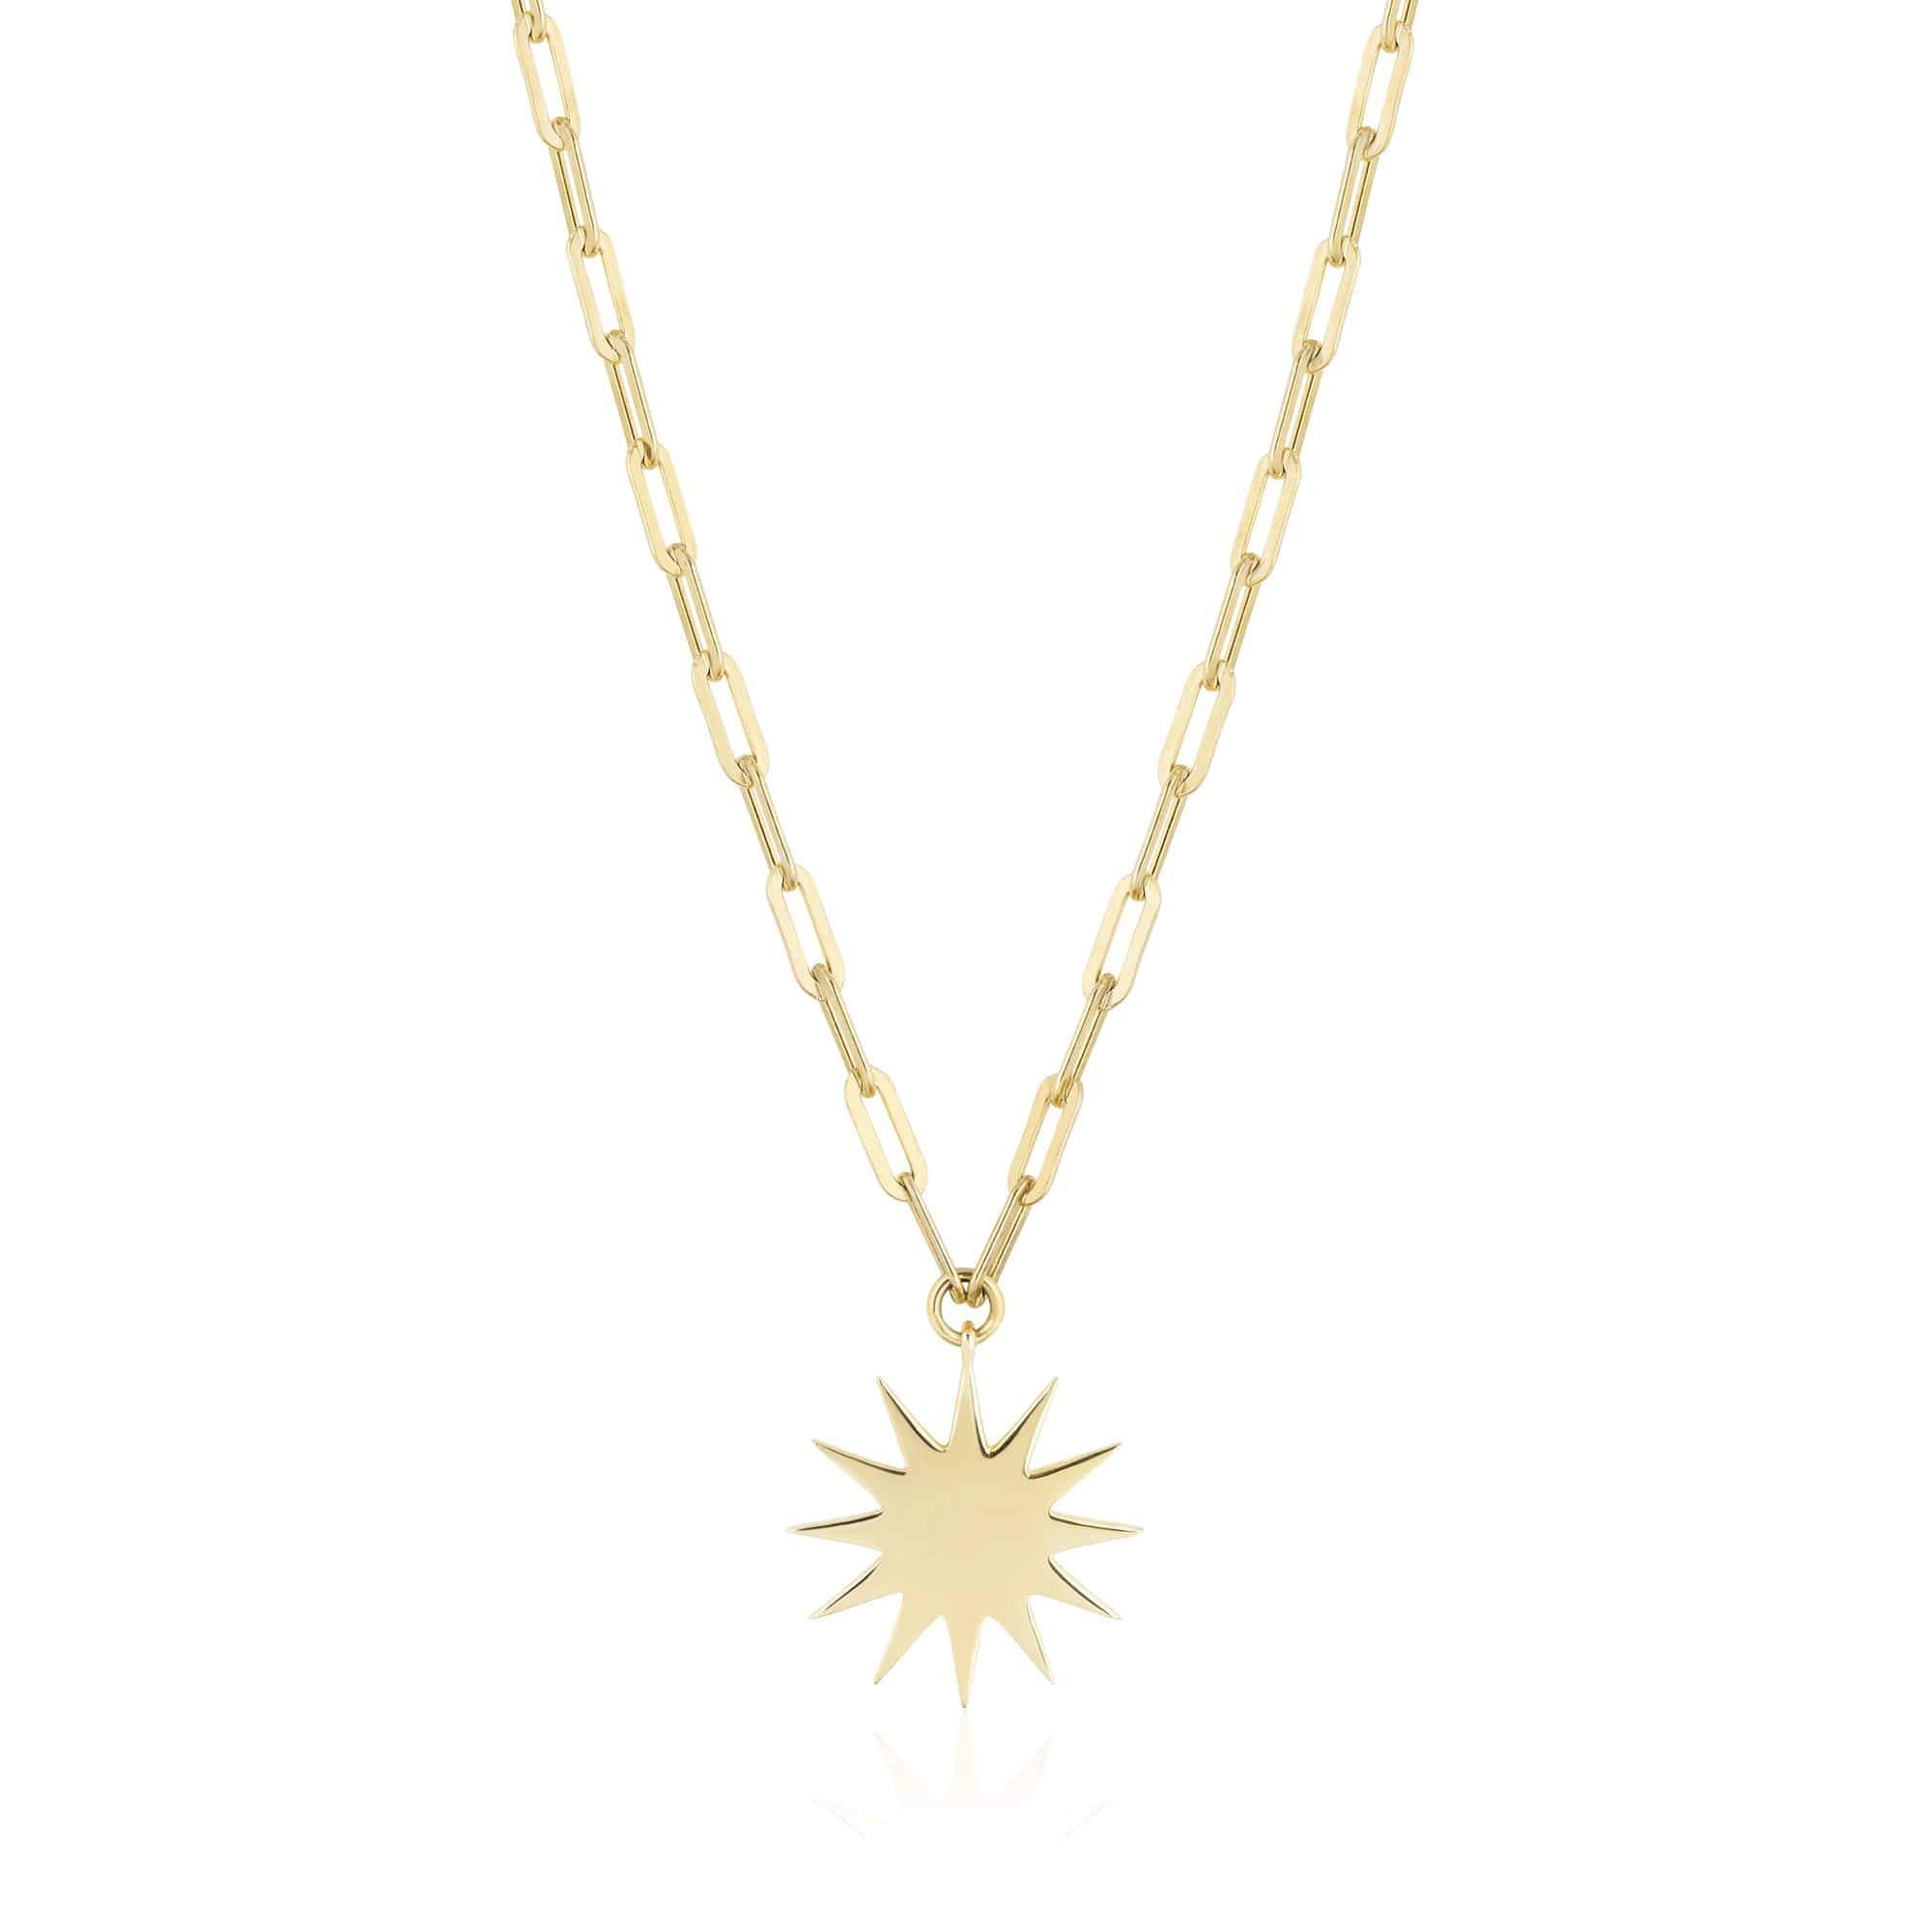 Sterling silver plated in 14 karat yellow gold starburst charm on 16" chain.